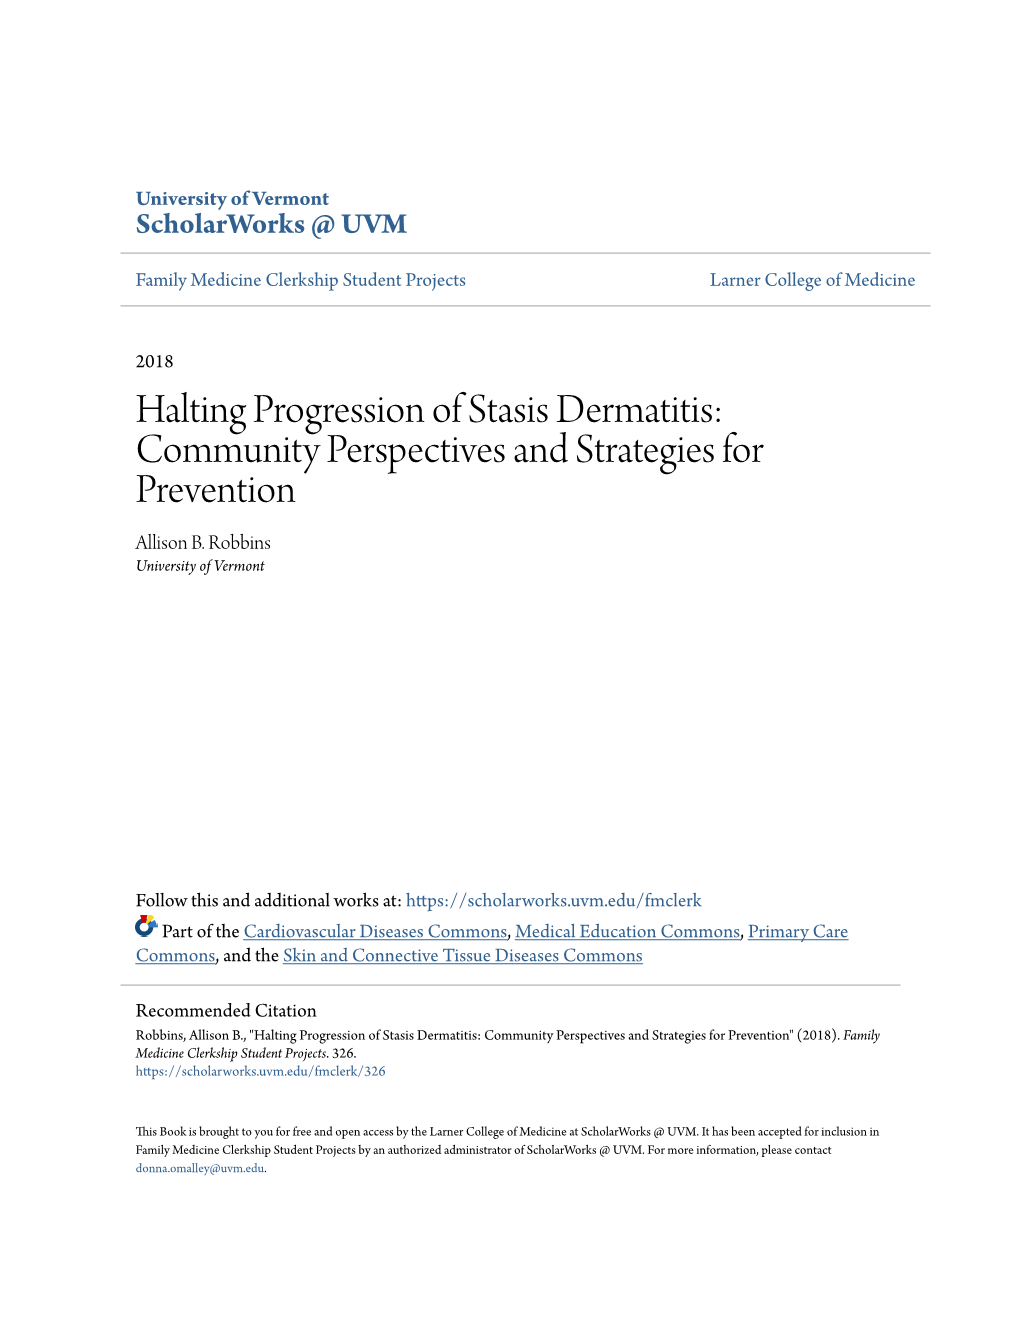 Halting Progression of Stasis Dermatitis: Community Perspectives and Strategies for Prevention Allison B